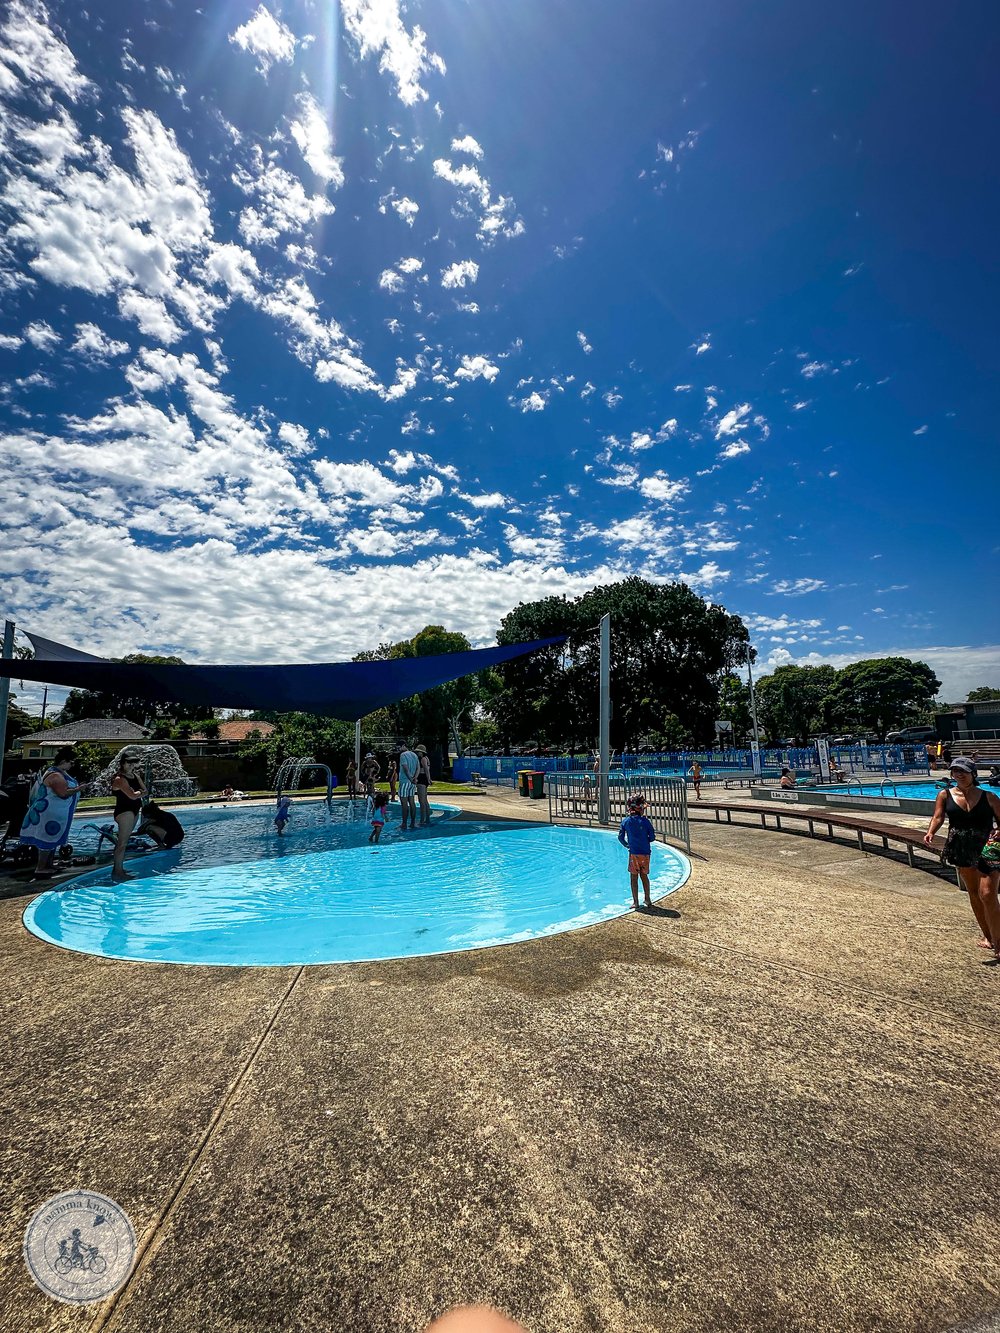 pascoe vale outdoor pool, pascoe vale 23 -  mamma knows melbourne - copyright-21.jpg